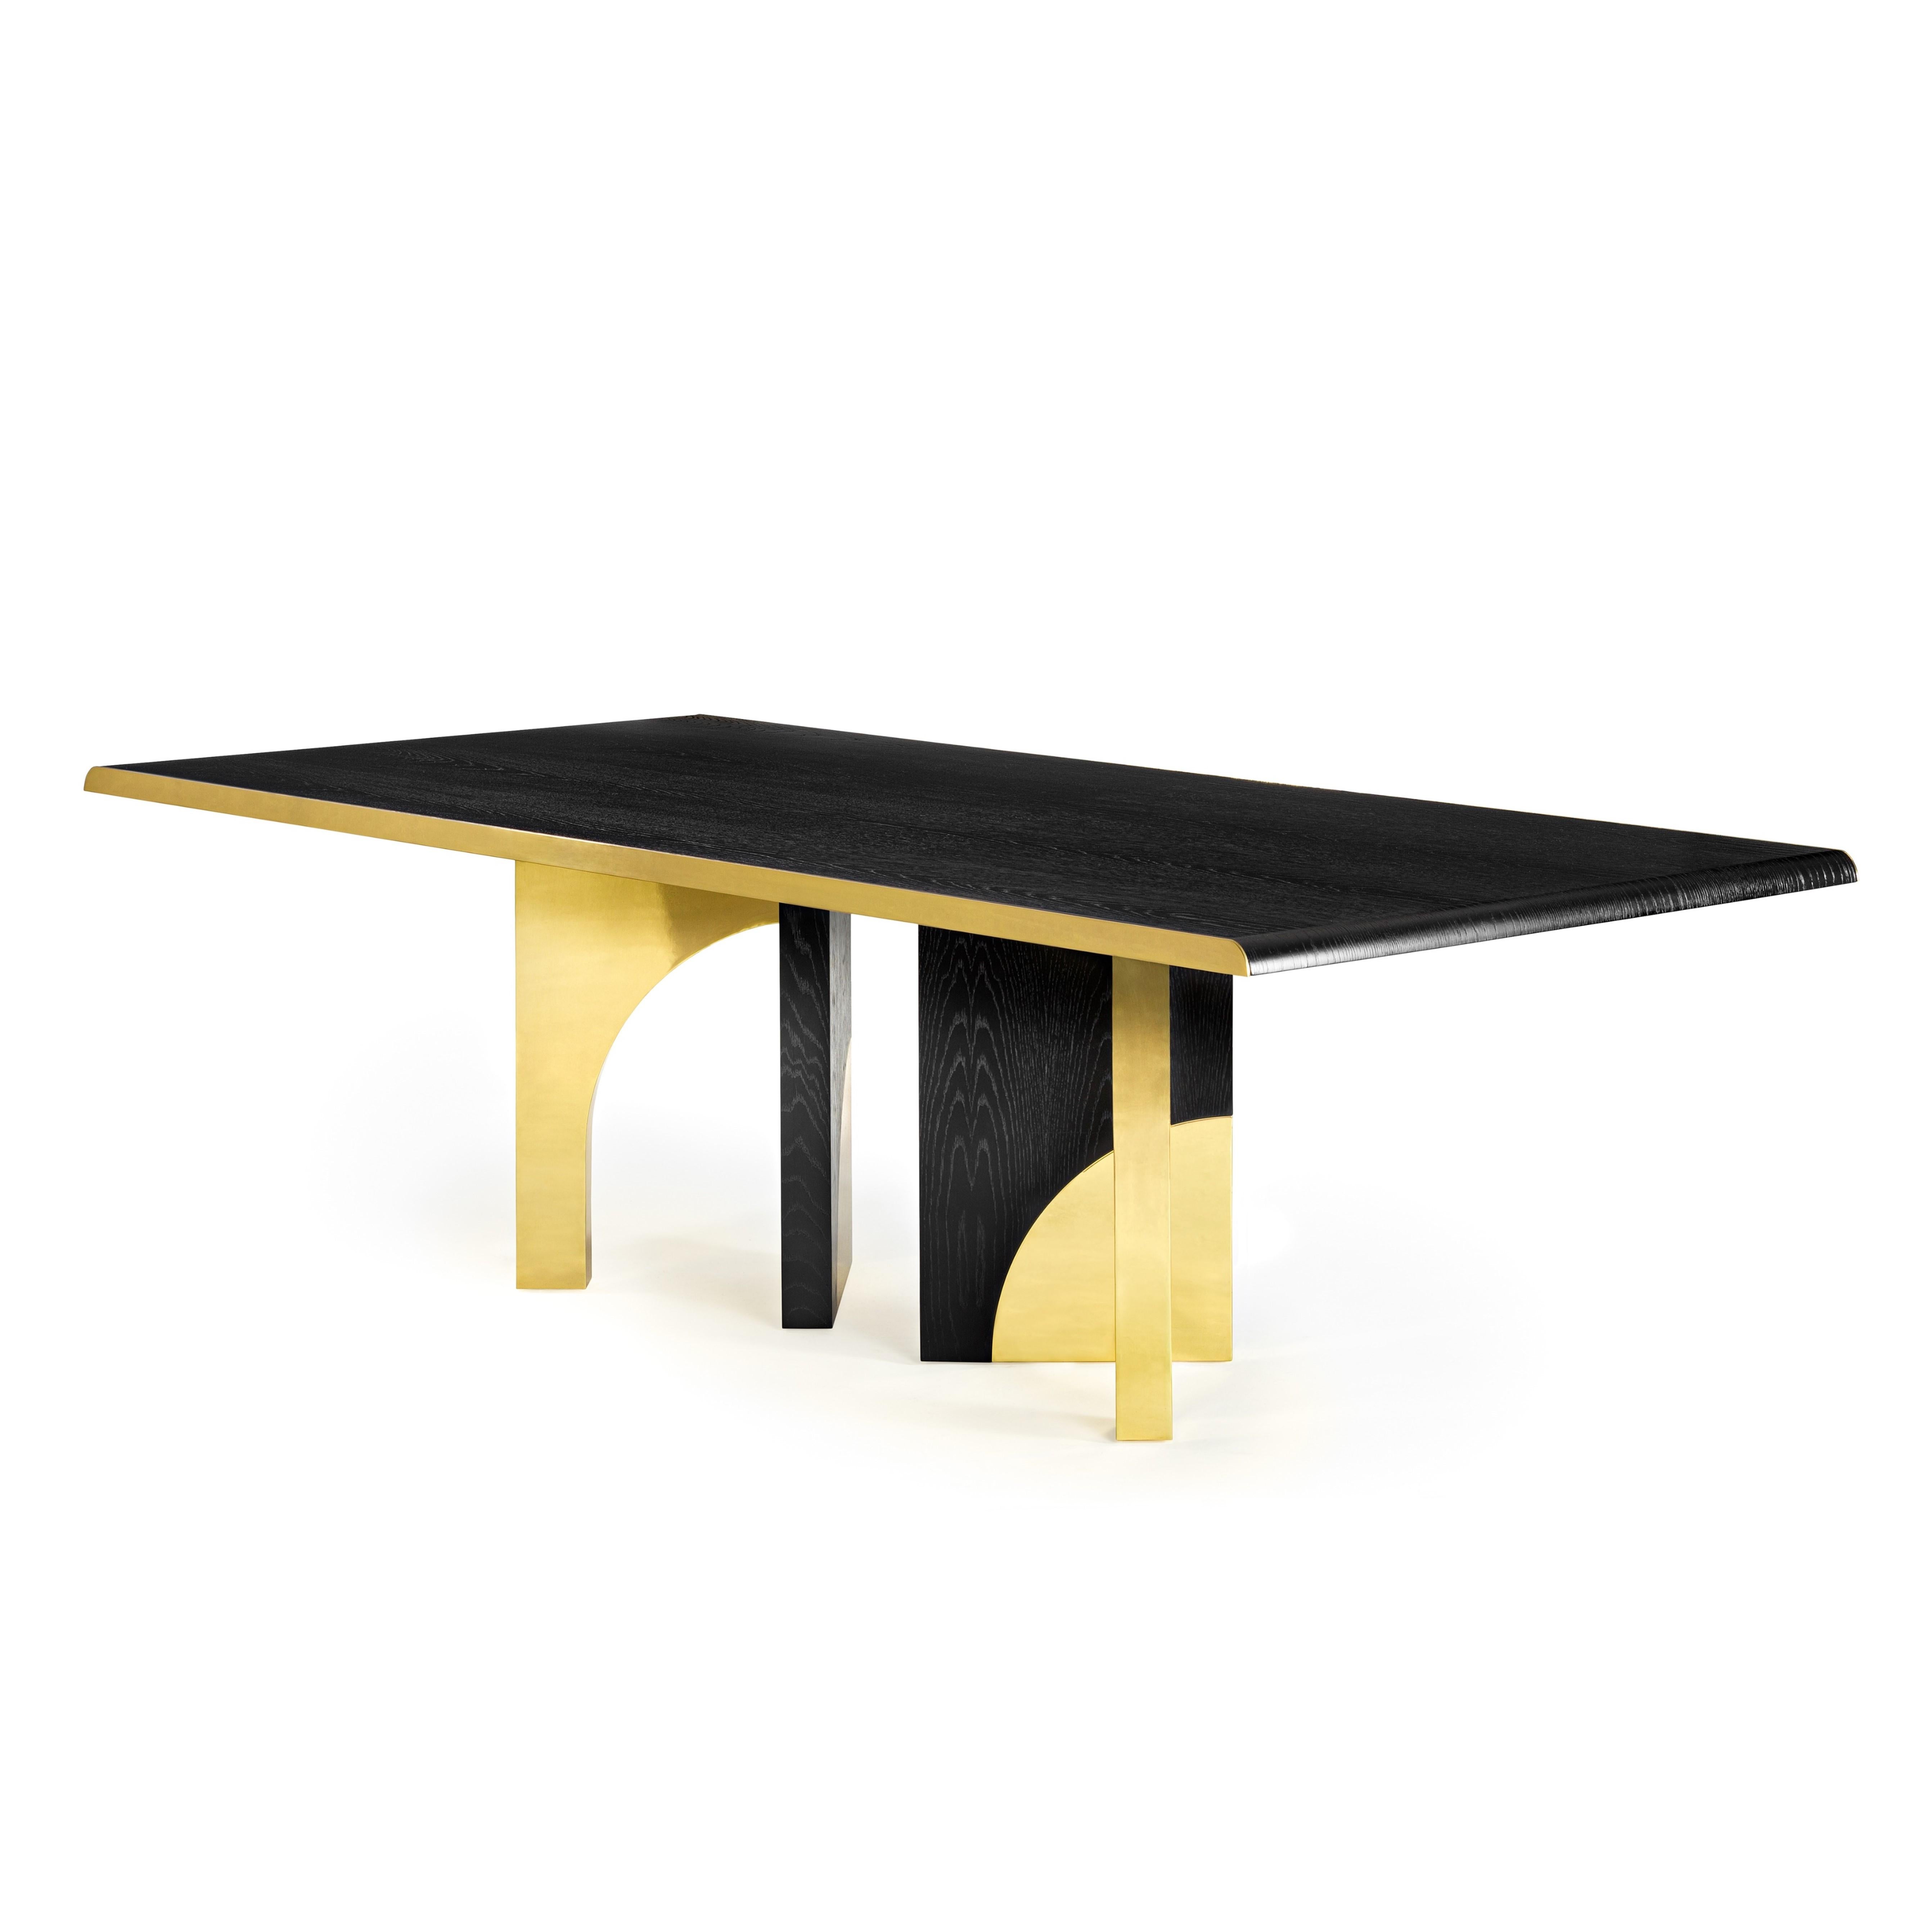 The Utopia dining table is designed in the likeness of the architectural scale that suggests a crossing through the structures of a utopian city, organized by the principles of symmetry and ideal forms.
The imposing design combines dark oak and